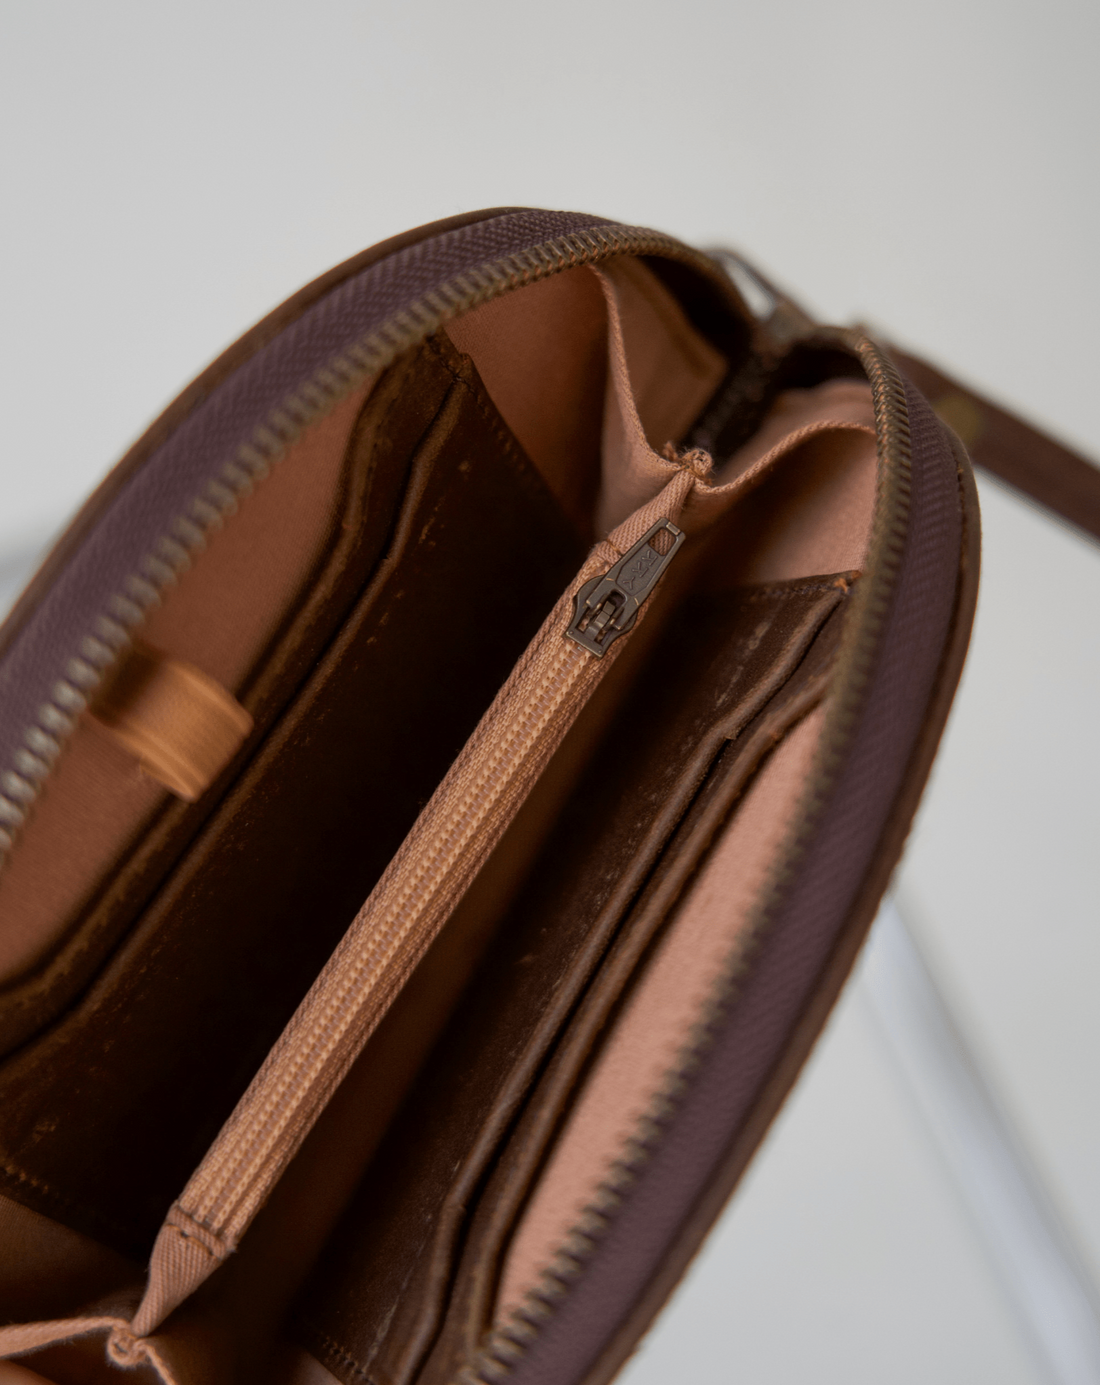 Mandrn Wedge Wallet - Saddle Brown Wallets & Money Clips